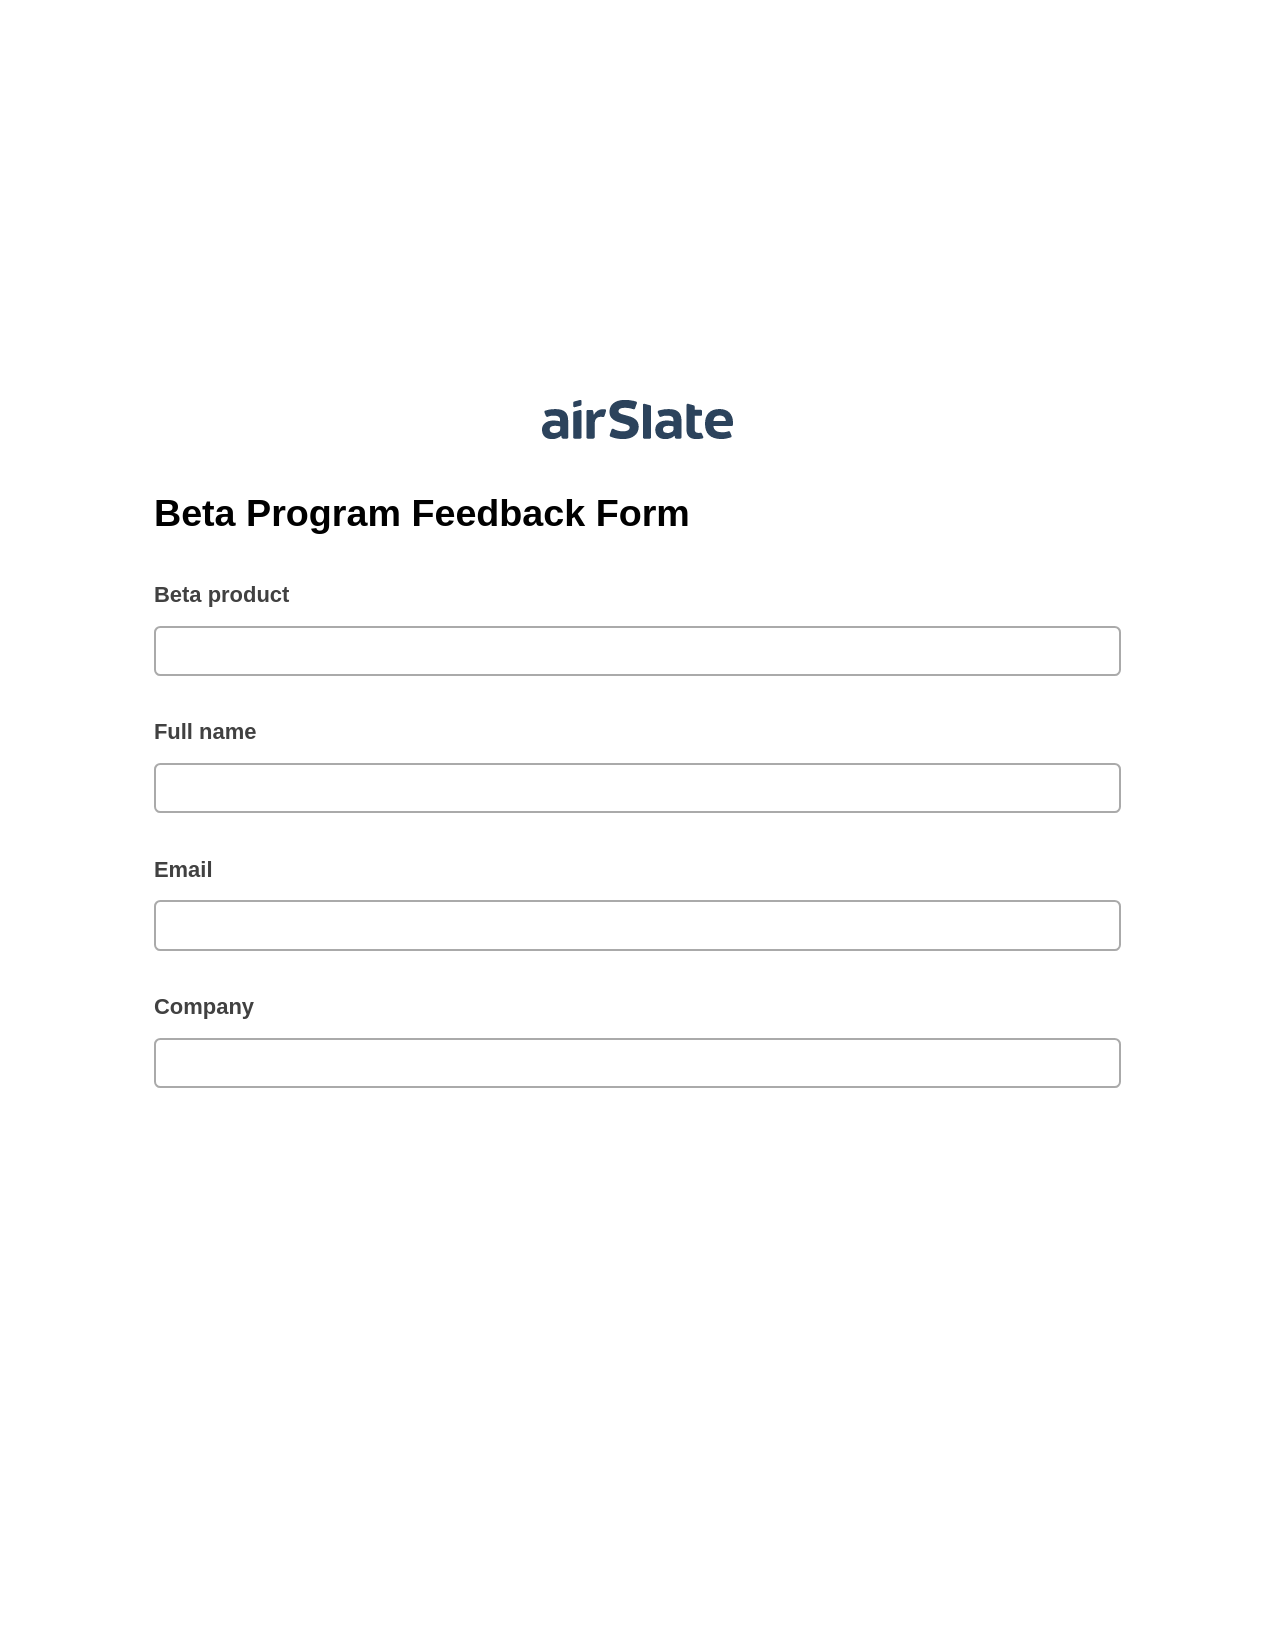 Beta Program Feedback Form Pre-fill Slate from MS Dynamics 365 Records Bot, Export to MS Dynamics 365 Bot, Export to Excel 365 Bot